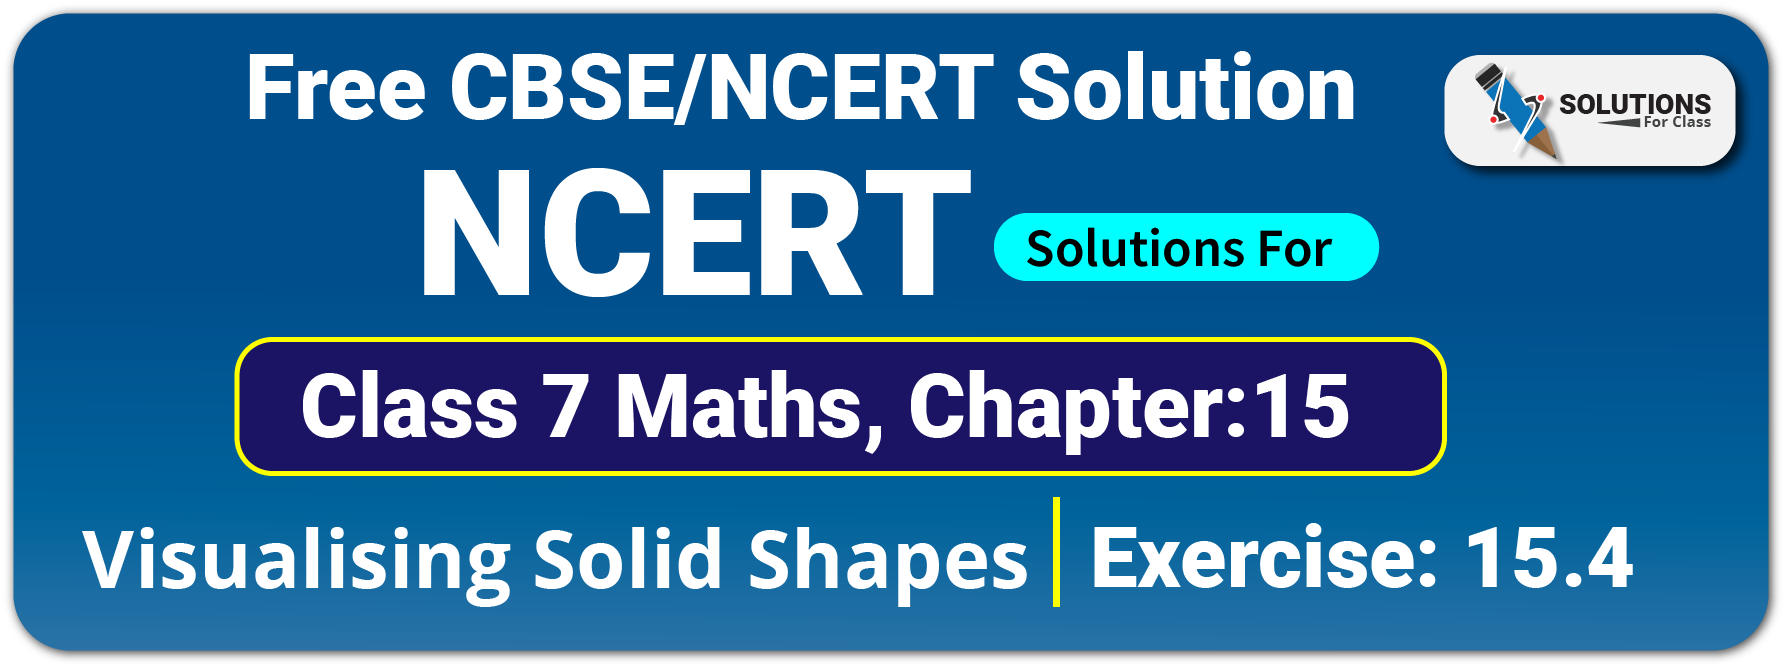 NCERT Solutions For Class 7 Maths Chapter 15 Visulising Solid Shapes Exercise 15.4